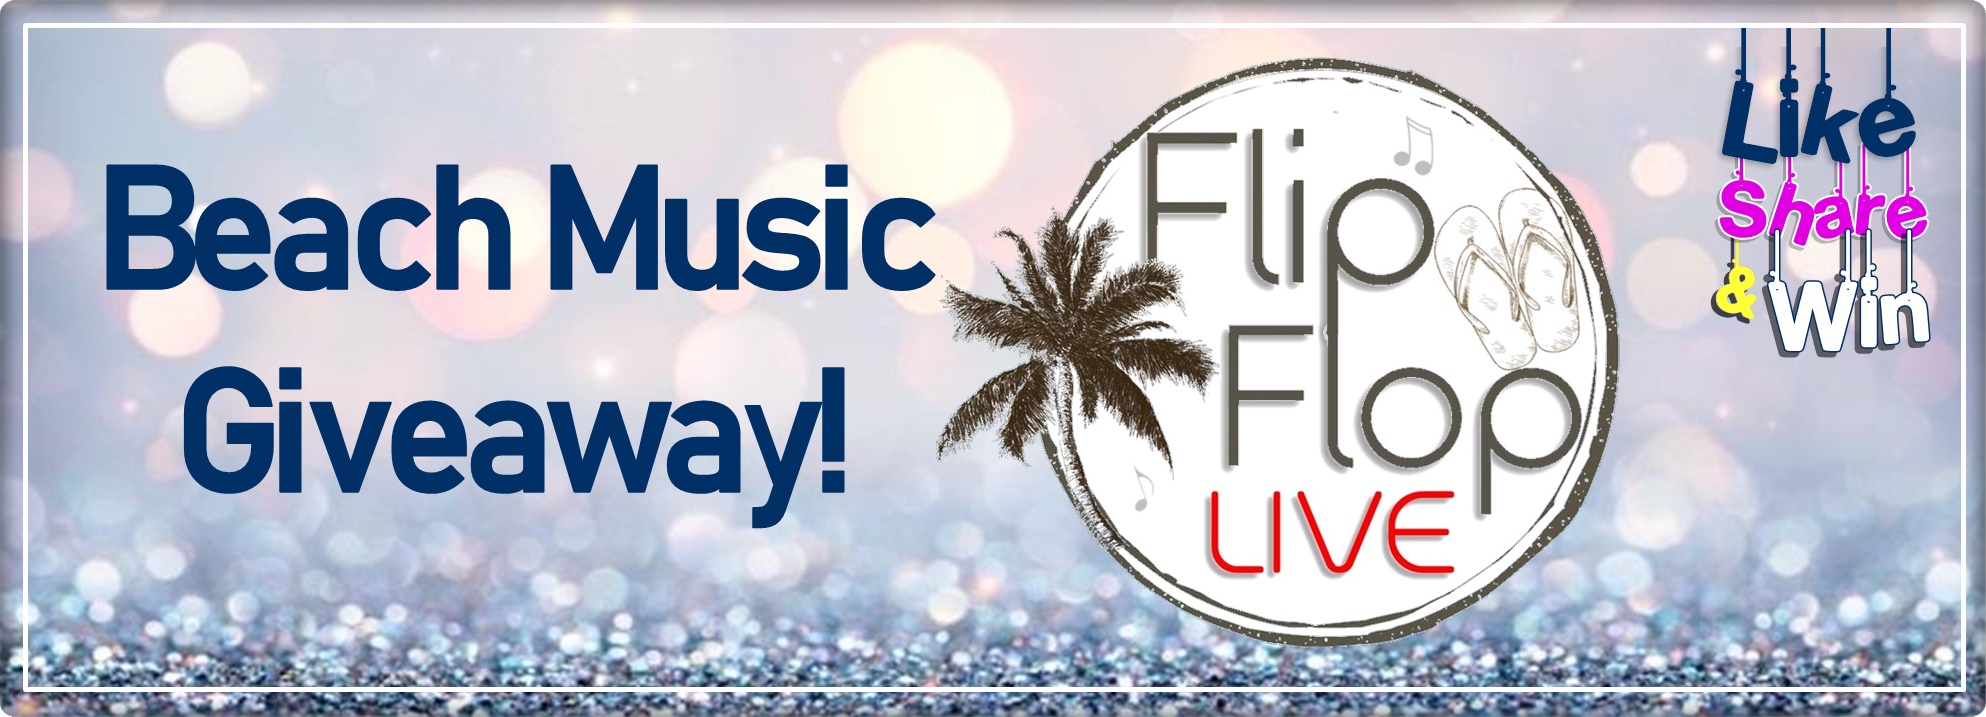 The latest contests and giveaways in Beach Music!